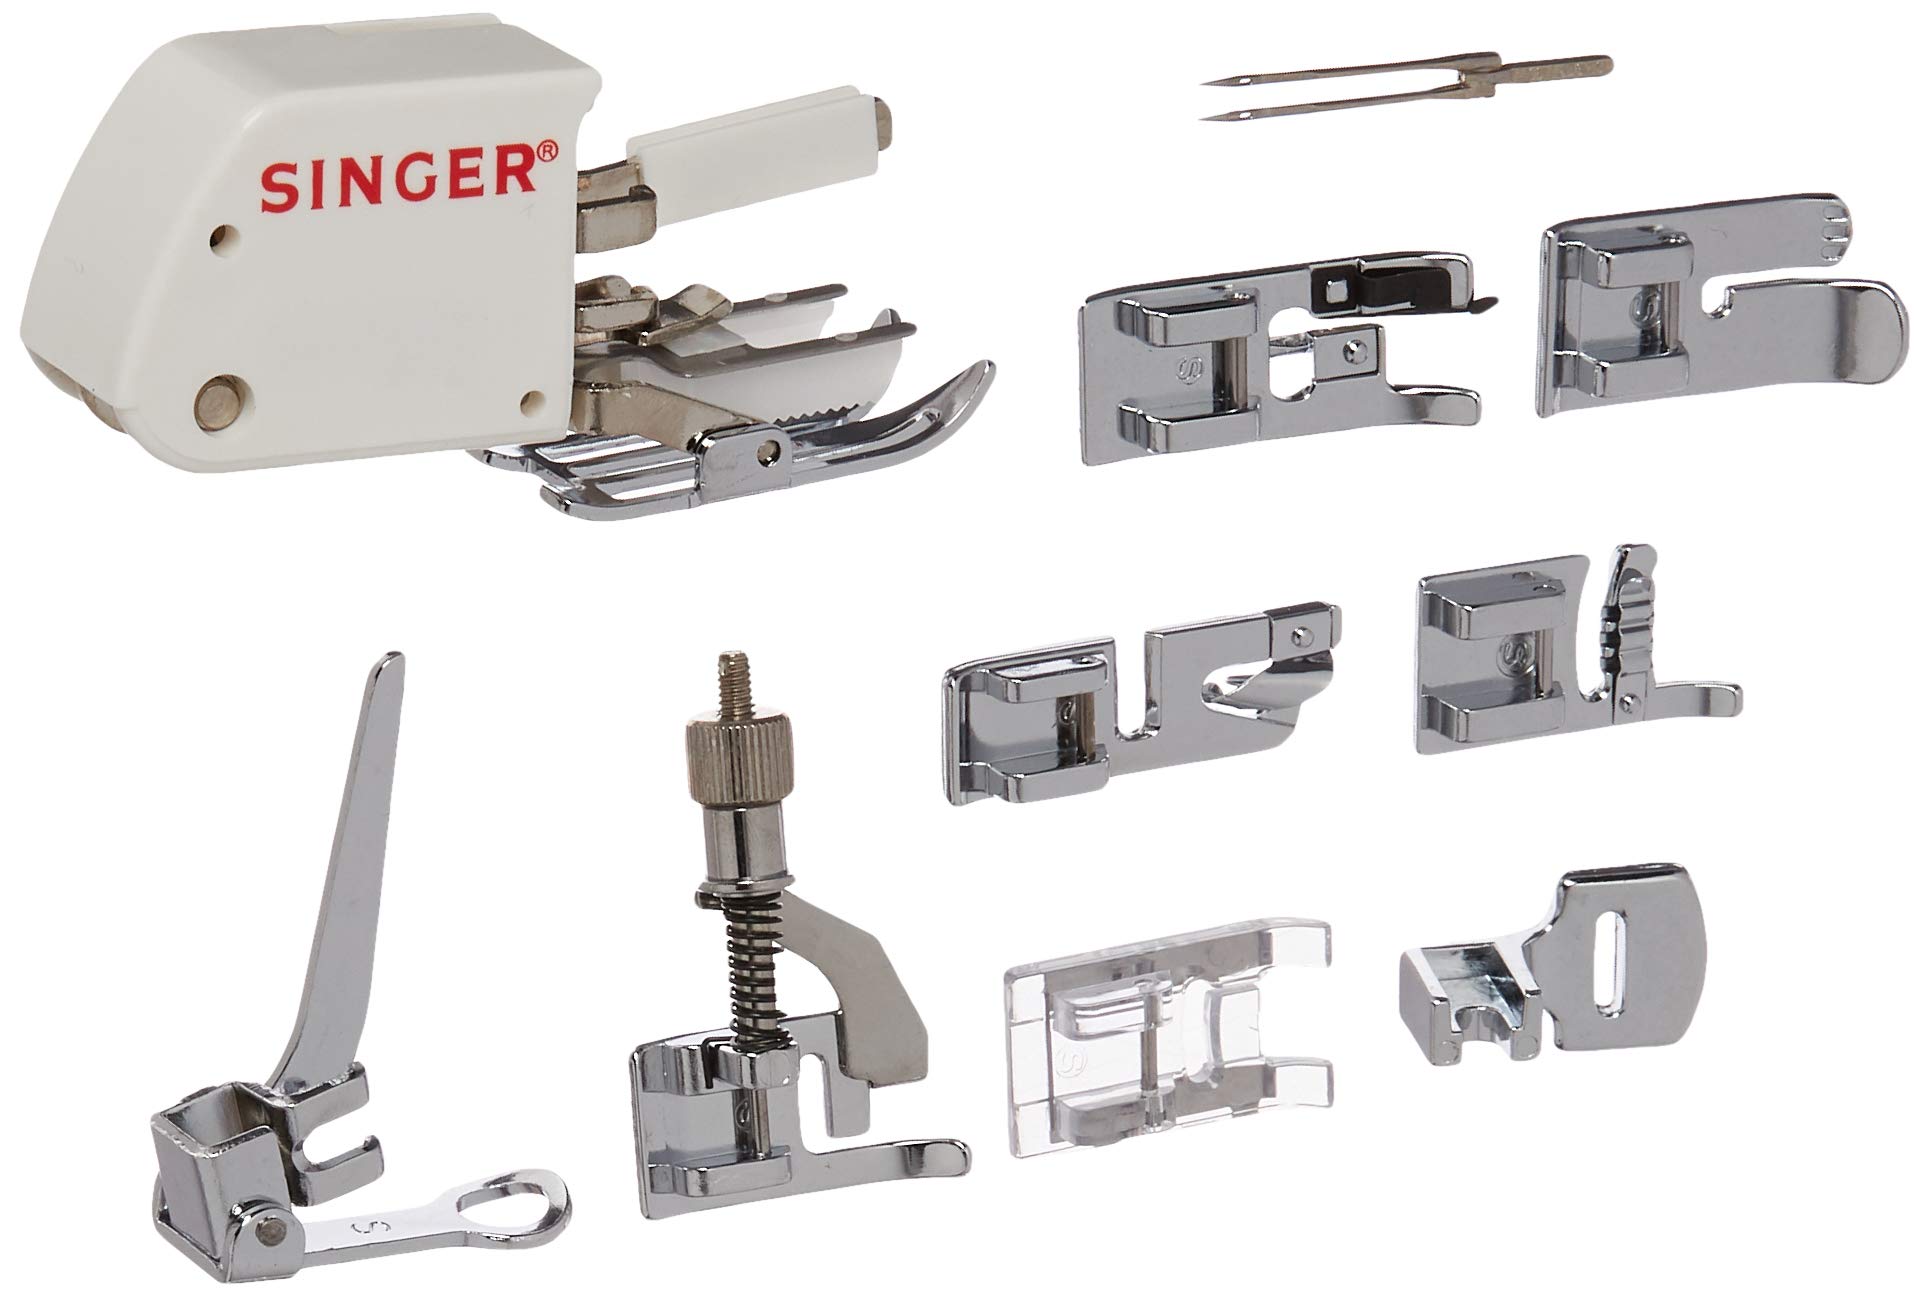 SINGER | Sewing Machine Accessory Kit, Including 9 Presser Feet, Twin Needle, and Case, Clear - Sewing Made Easy